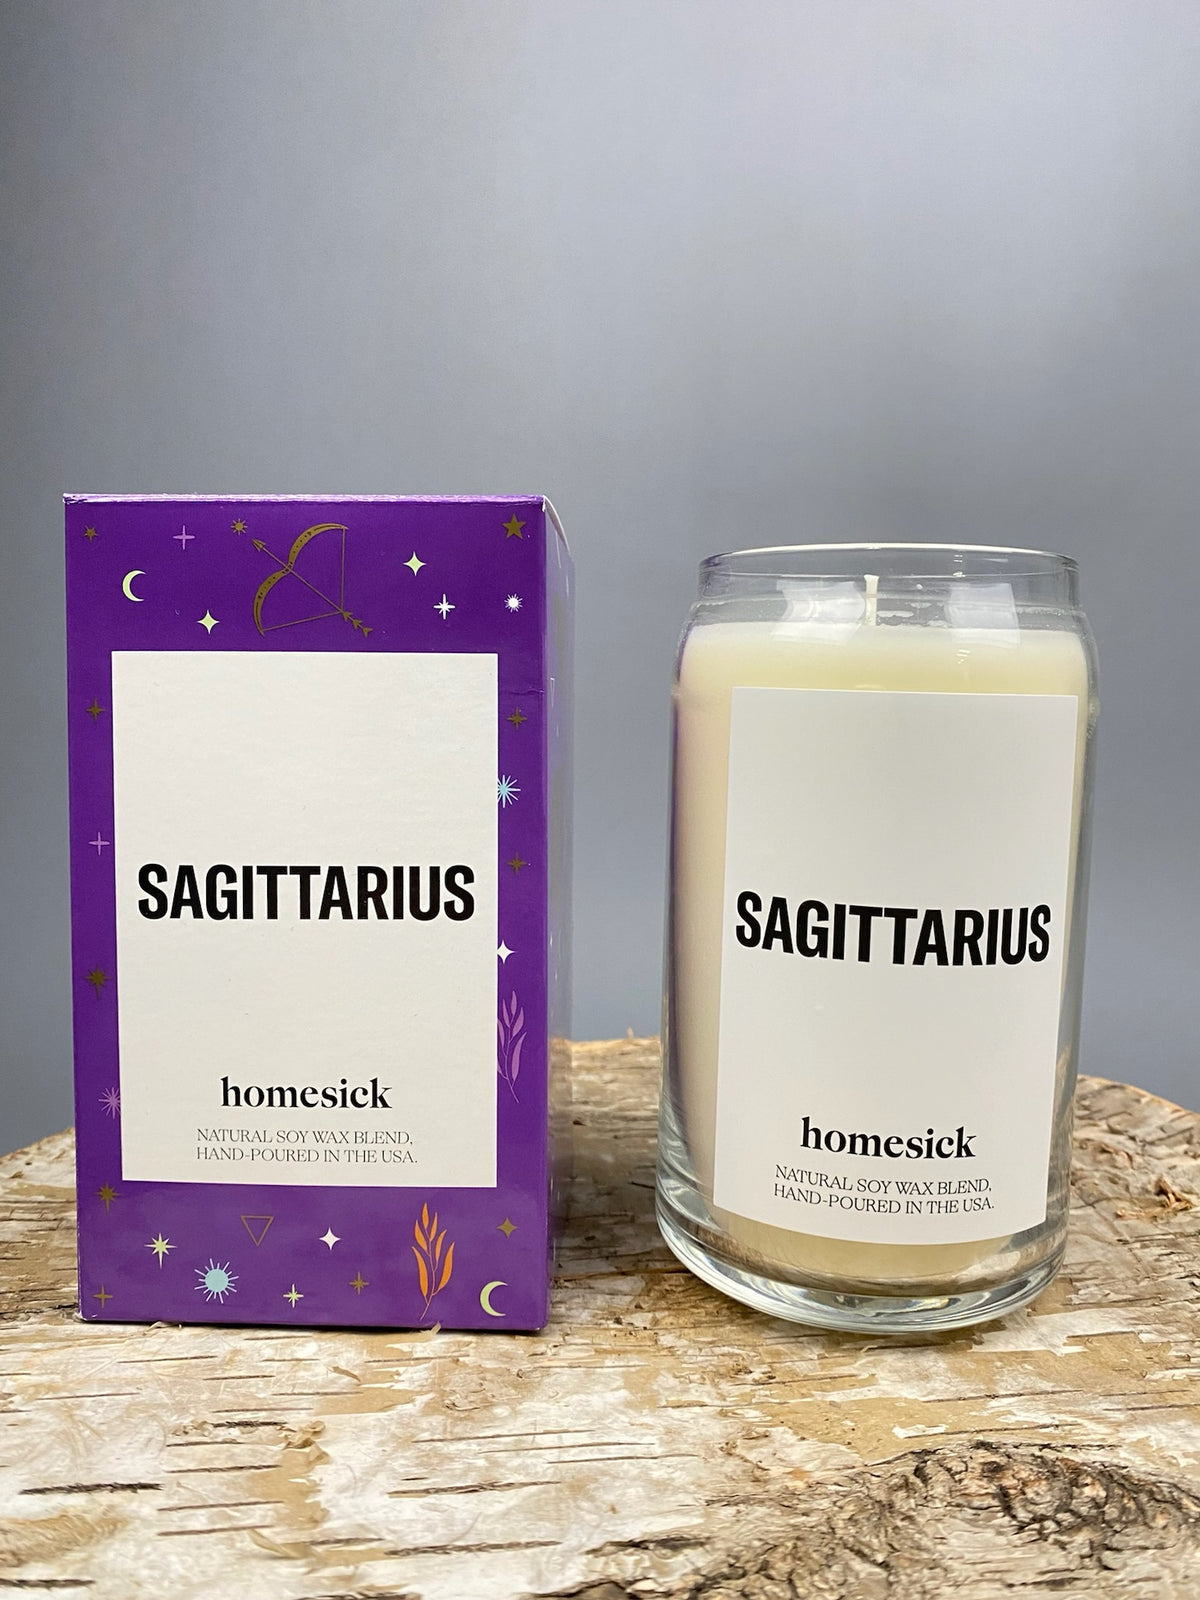 Homesick Sagittarius candle - Trendy Candles at Lush Fashion Lounge Boutique in Oklahoma City